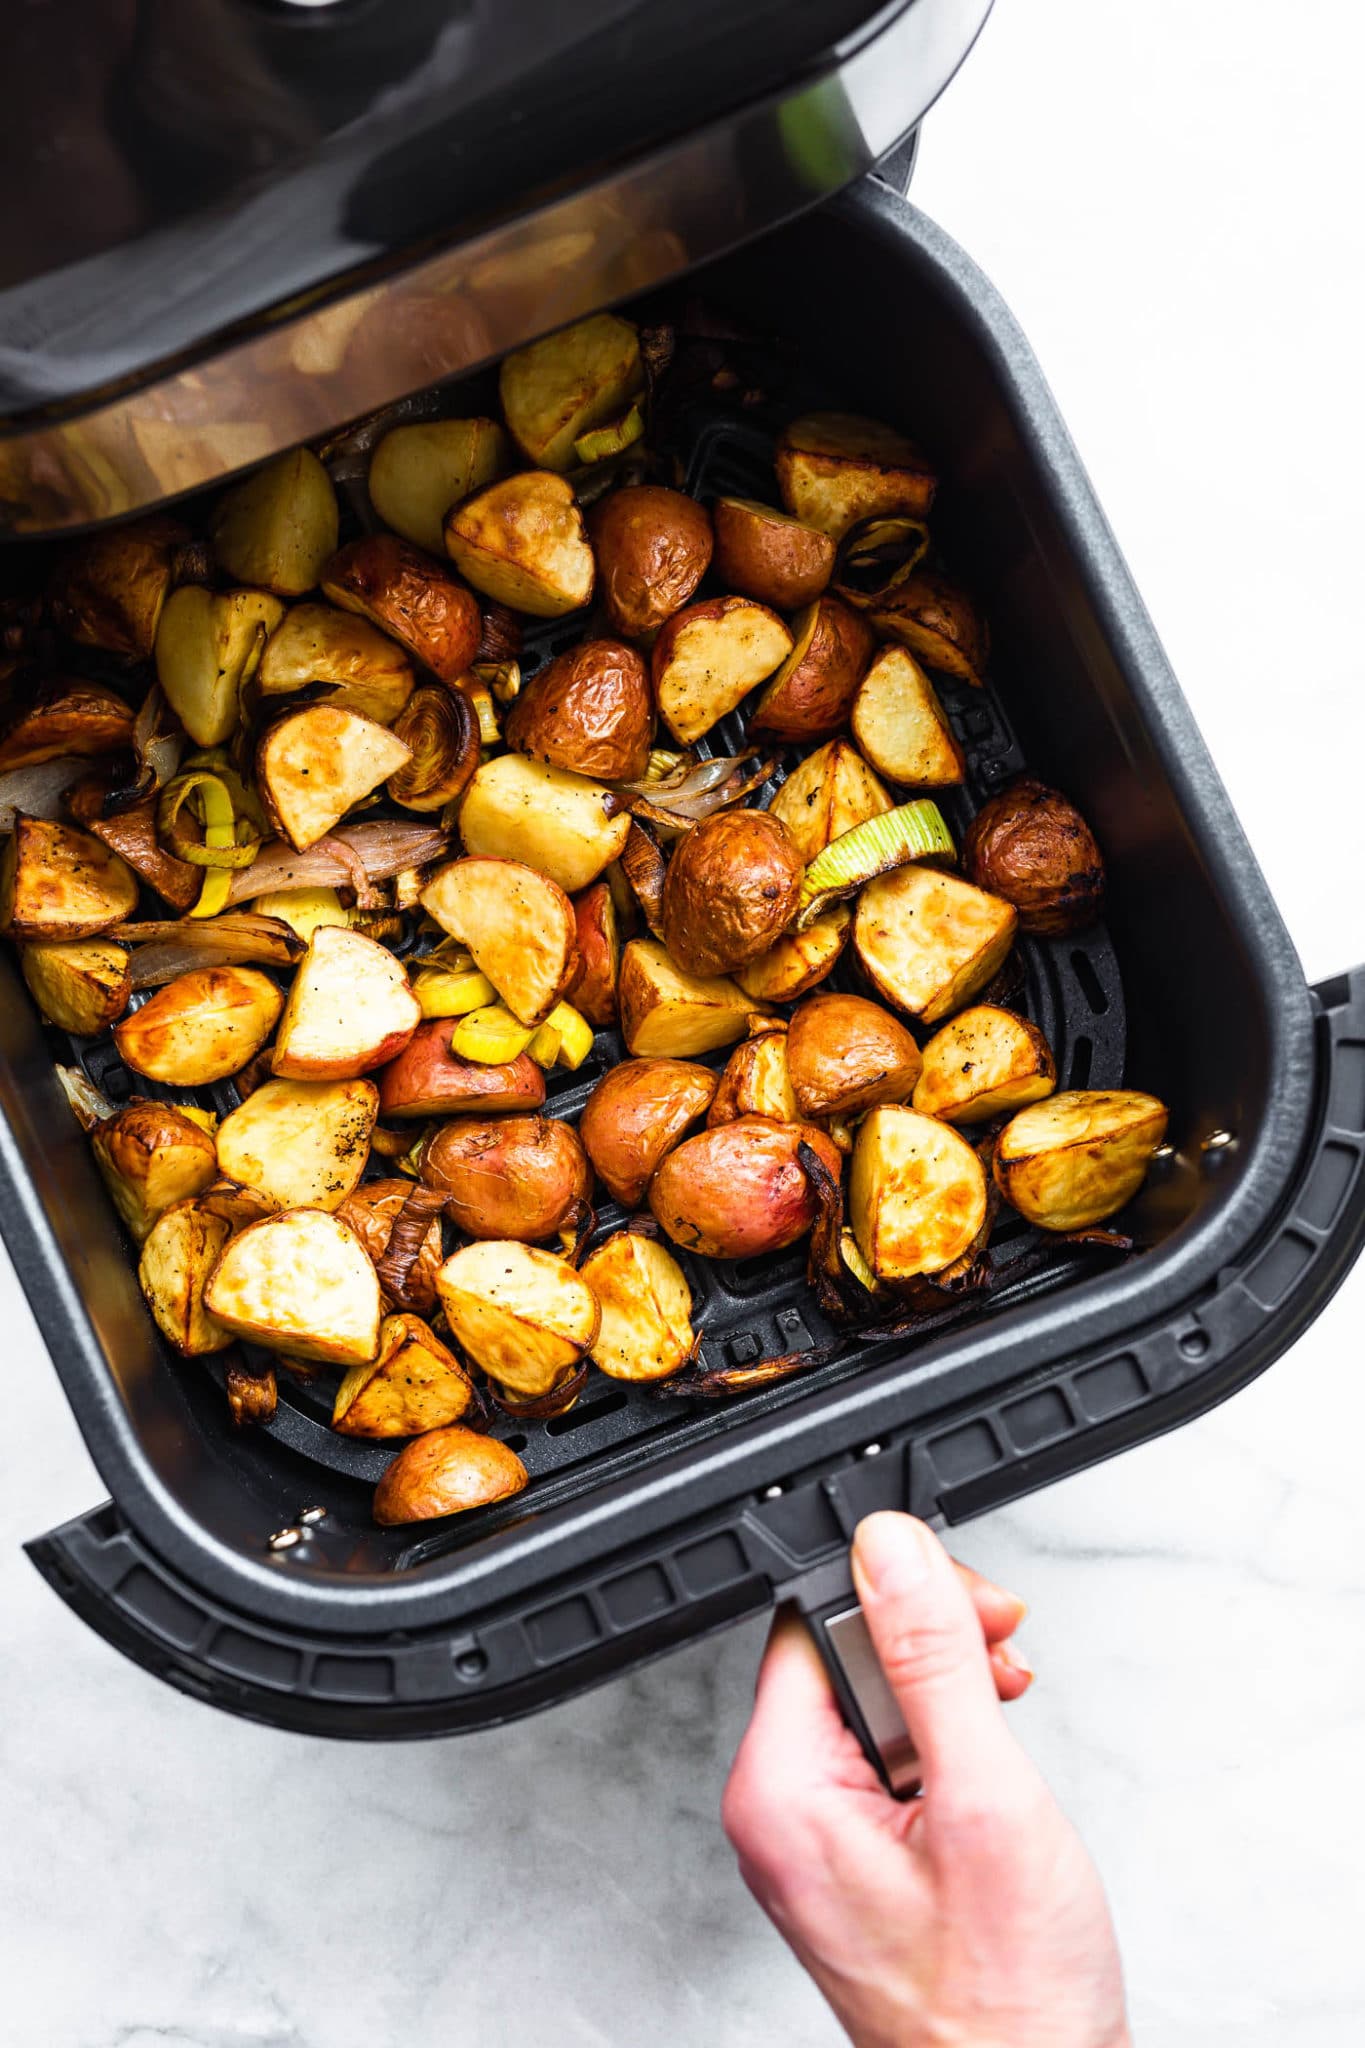 a hand pulling the basket out of an air fryer basket full of roasted leeks and potatoes with onions